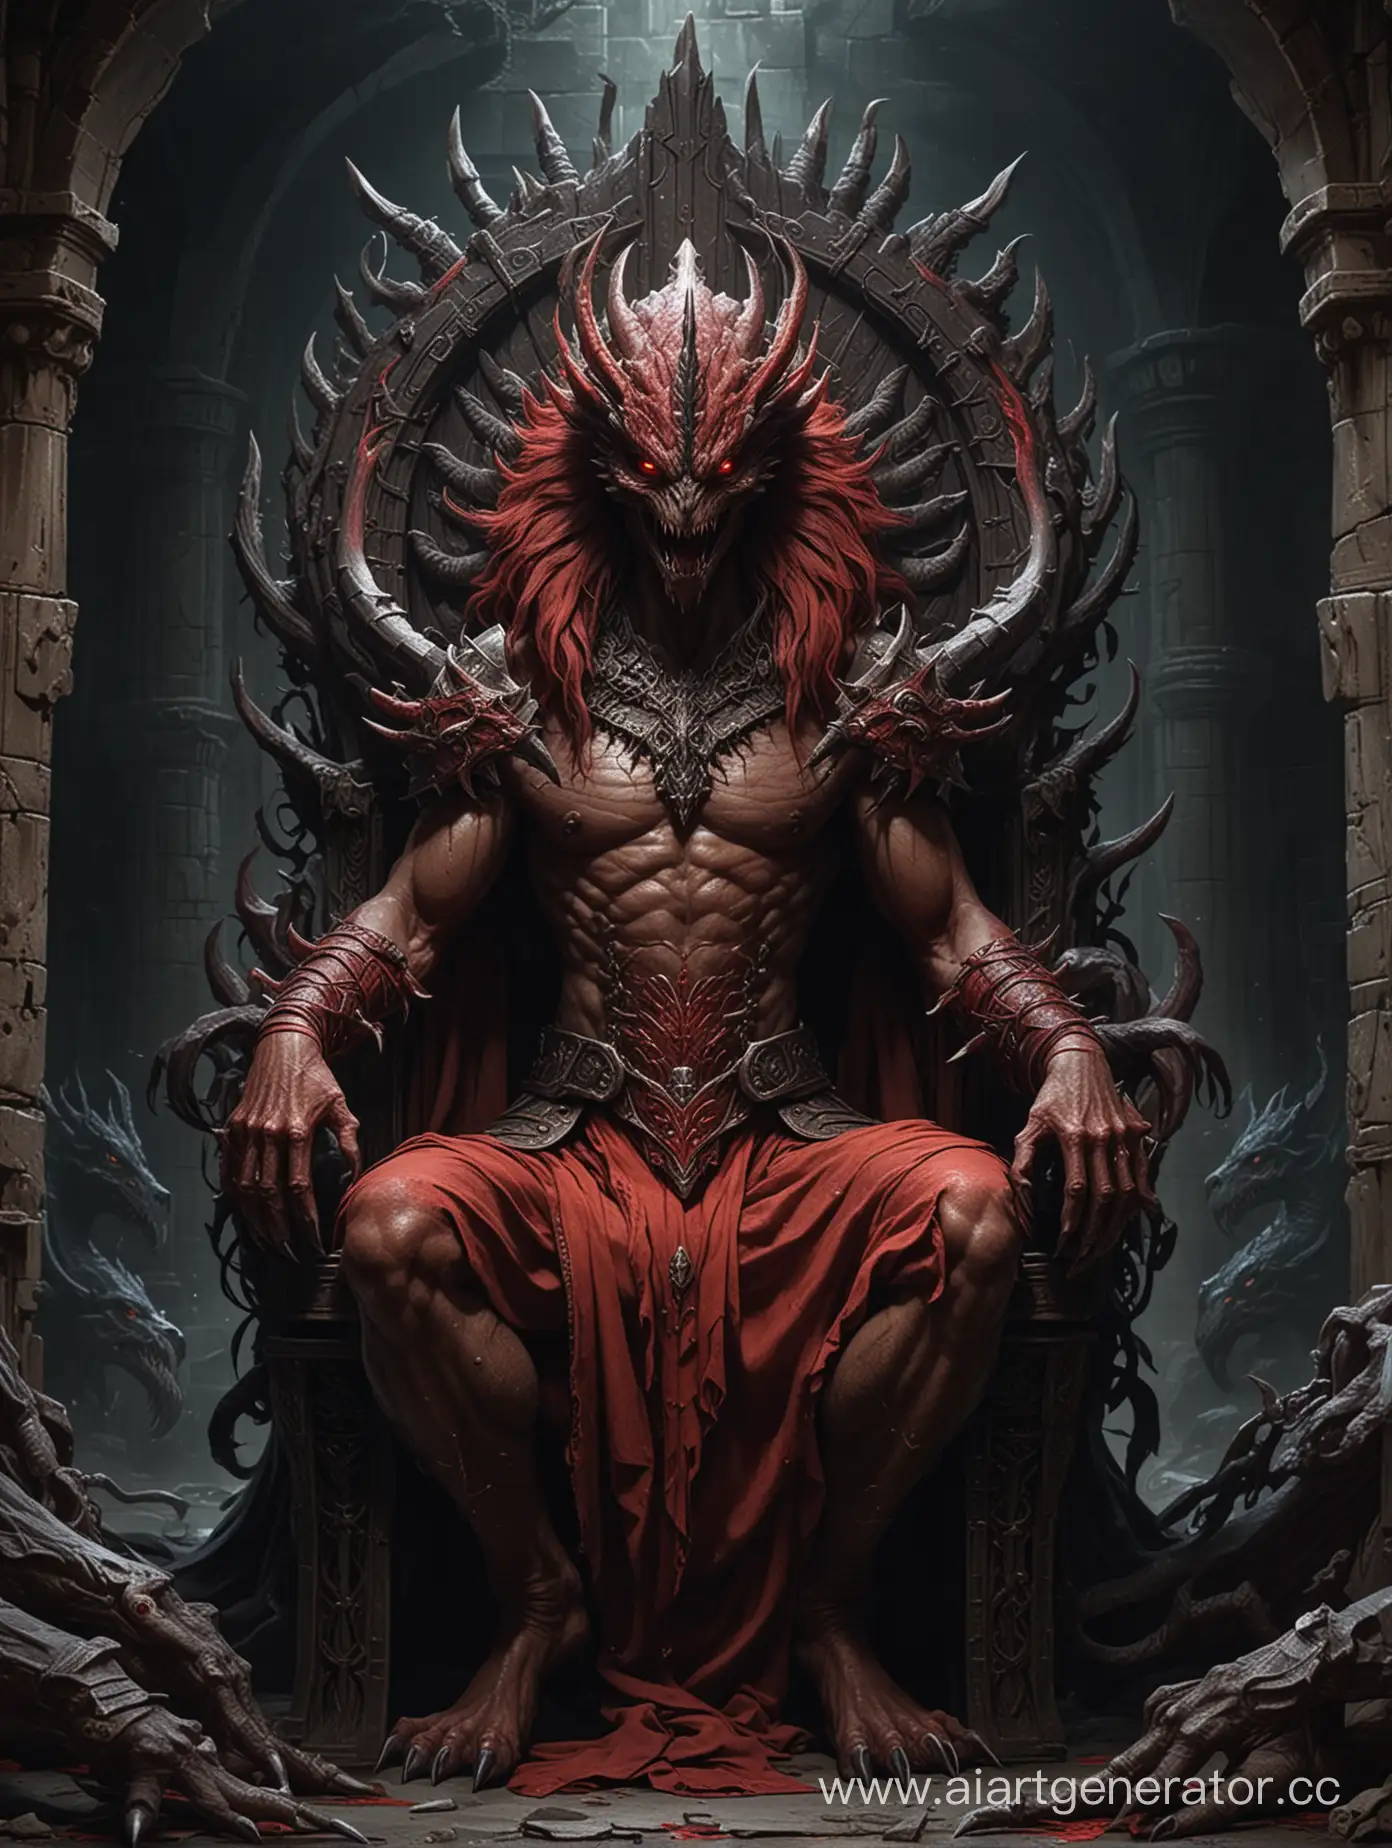 Sinister-Beast-Ruling-from-Dark-Throne-in-Mythical-Dungeon